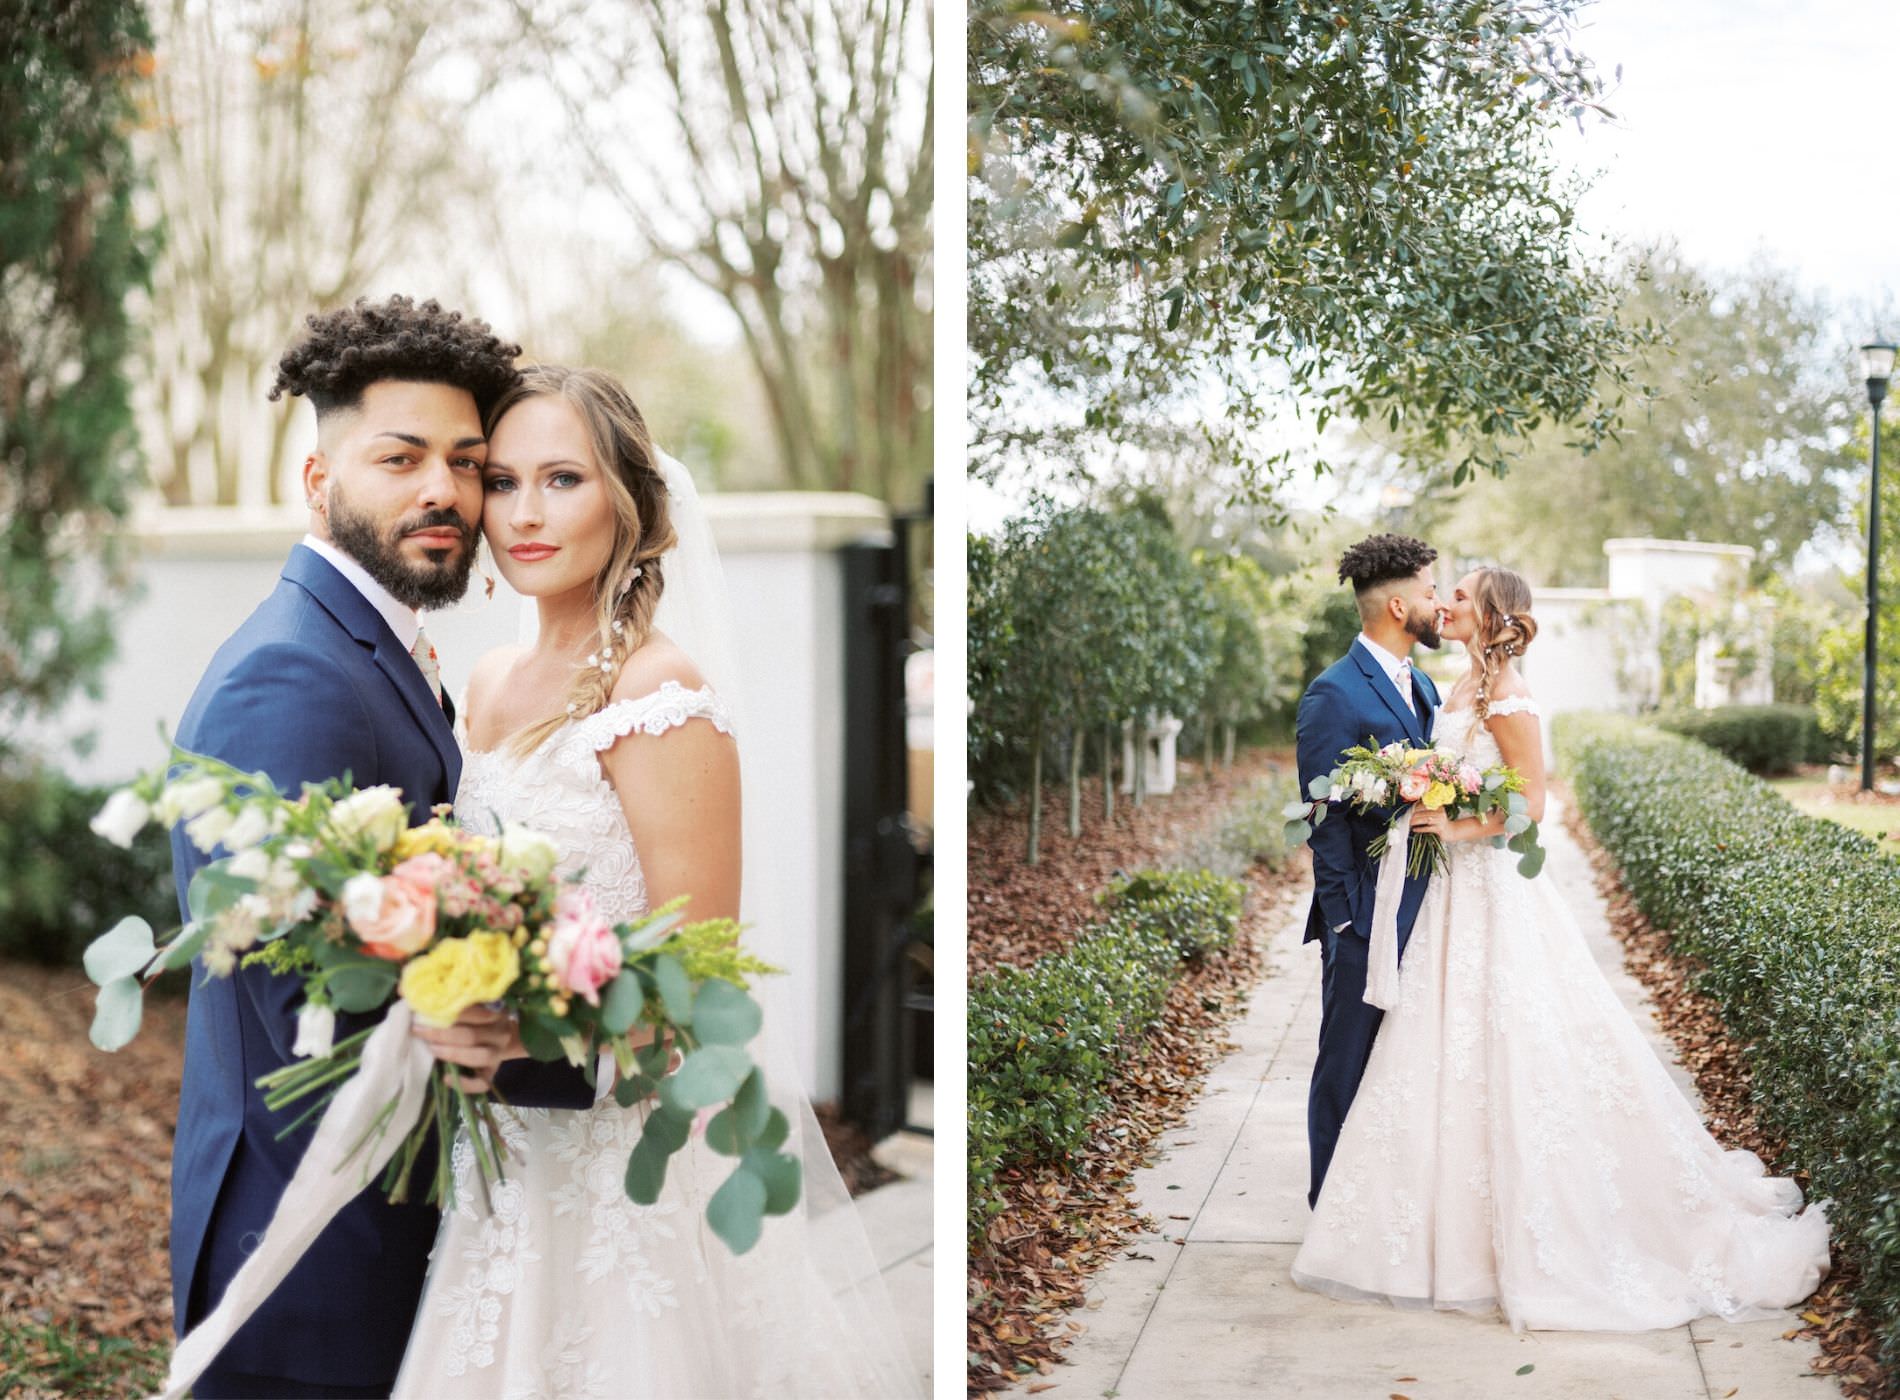 Tampa Styled Shoot European Pastel Spring Wedding Inspiration | Bride and Groom Outdoor Garden Portraits | Lace Ball Gown Wedding Dress Truly Forever Bridal